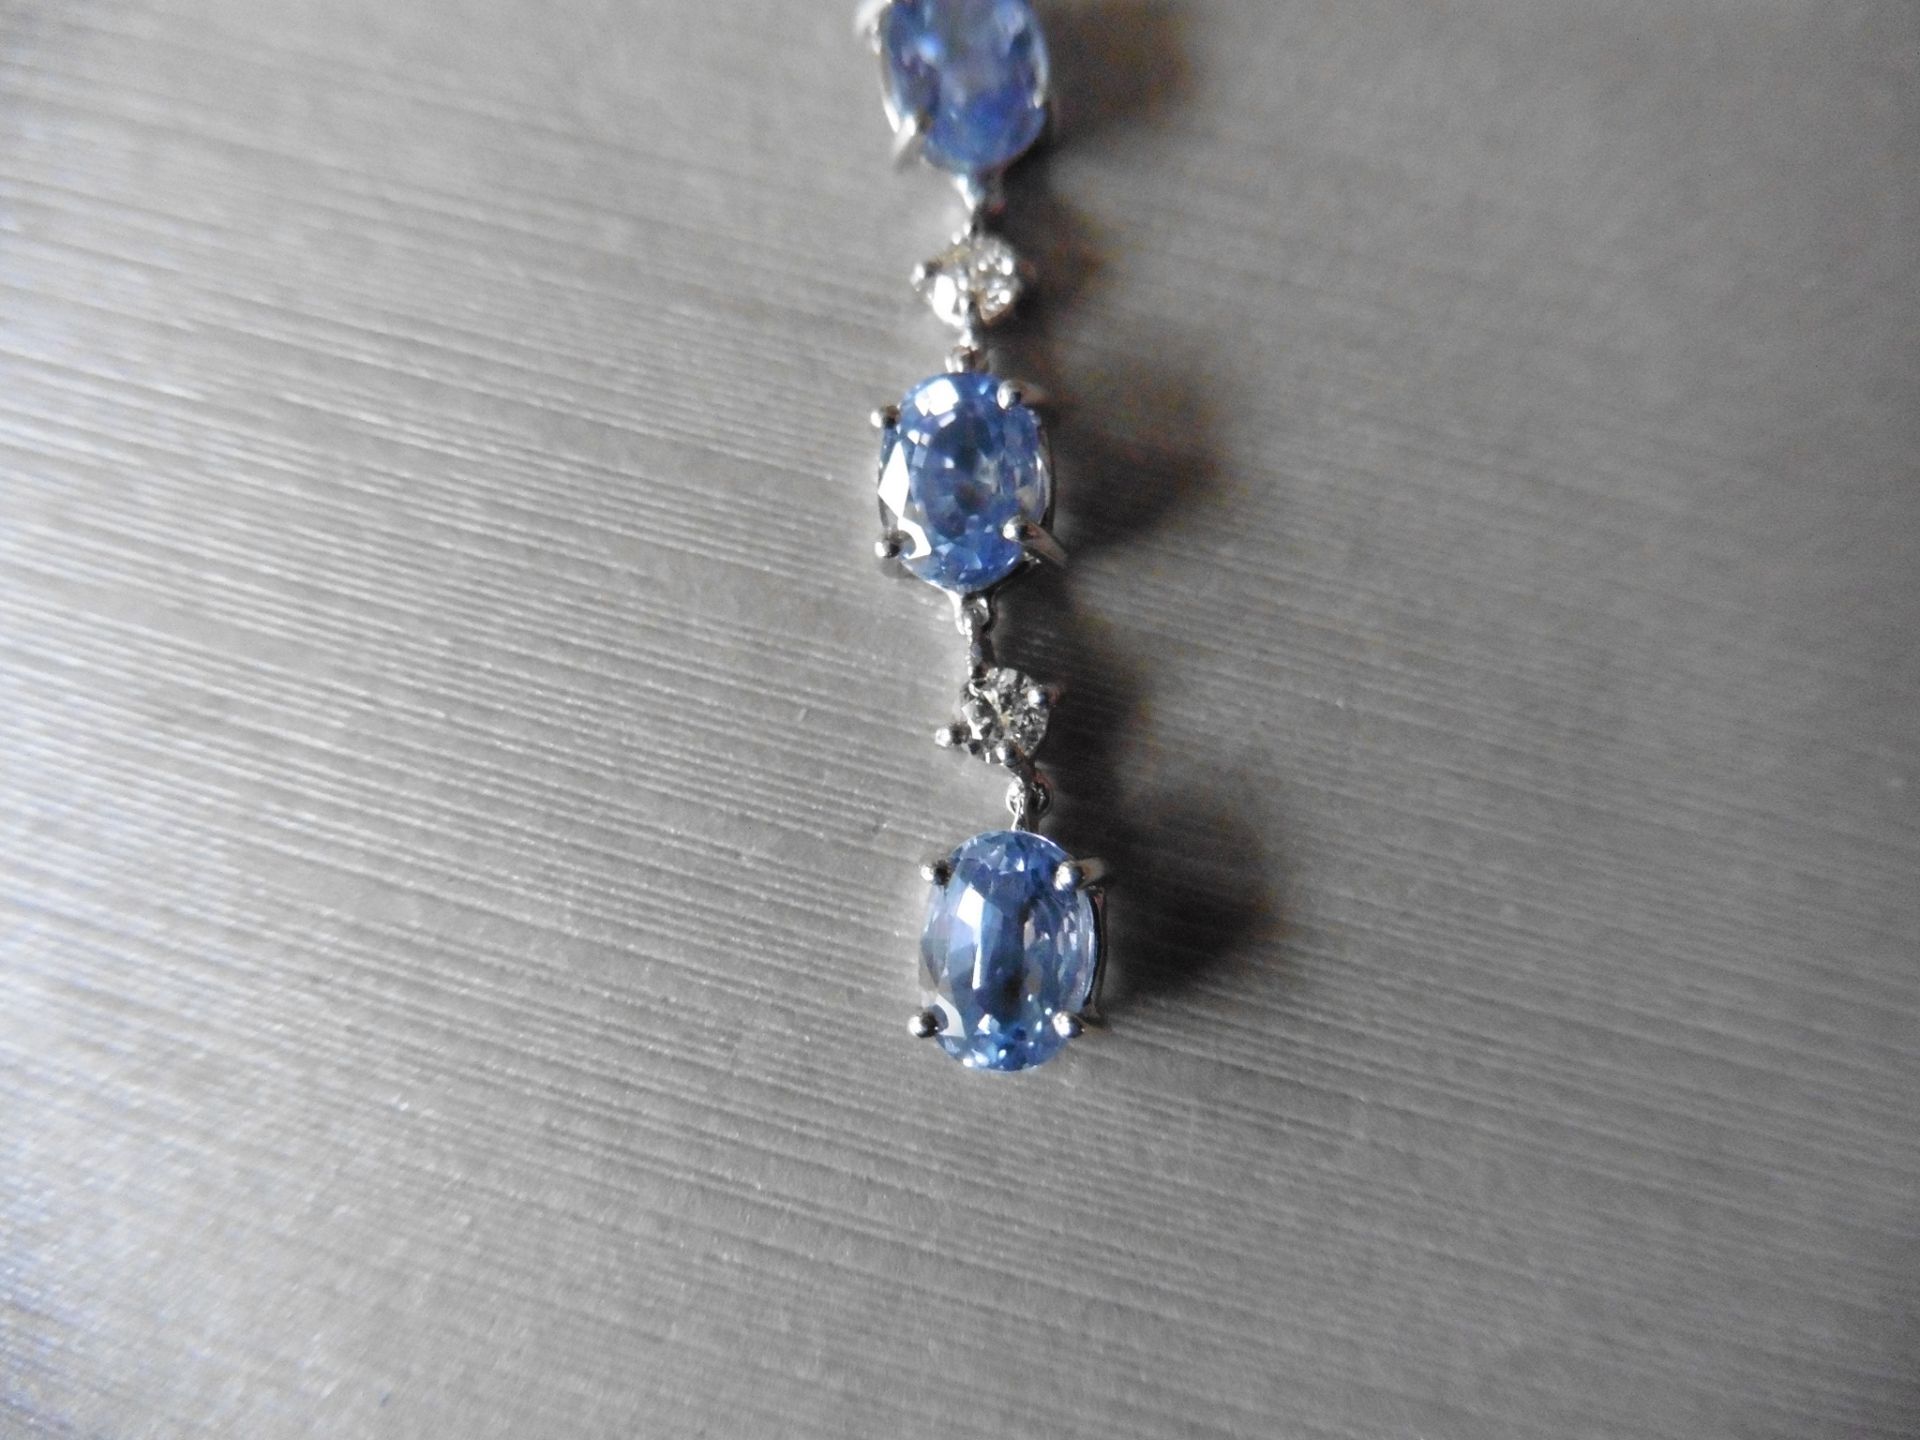 3ct ceylon sapphire and diamond drop earrings. Each set with 4 oval cut sapphires and 3 brilliant - Image 3 of 5